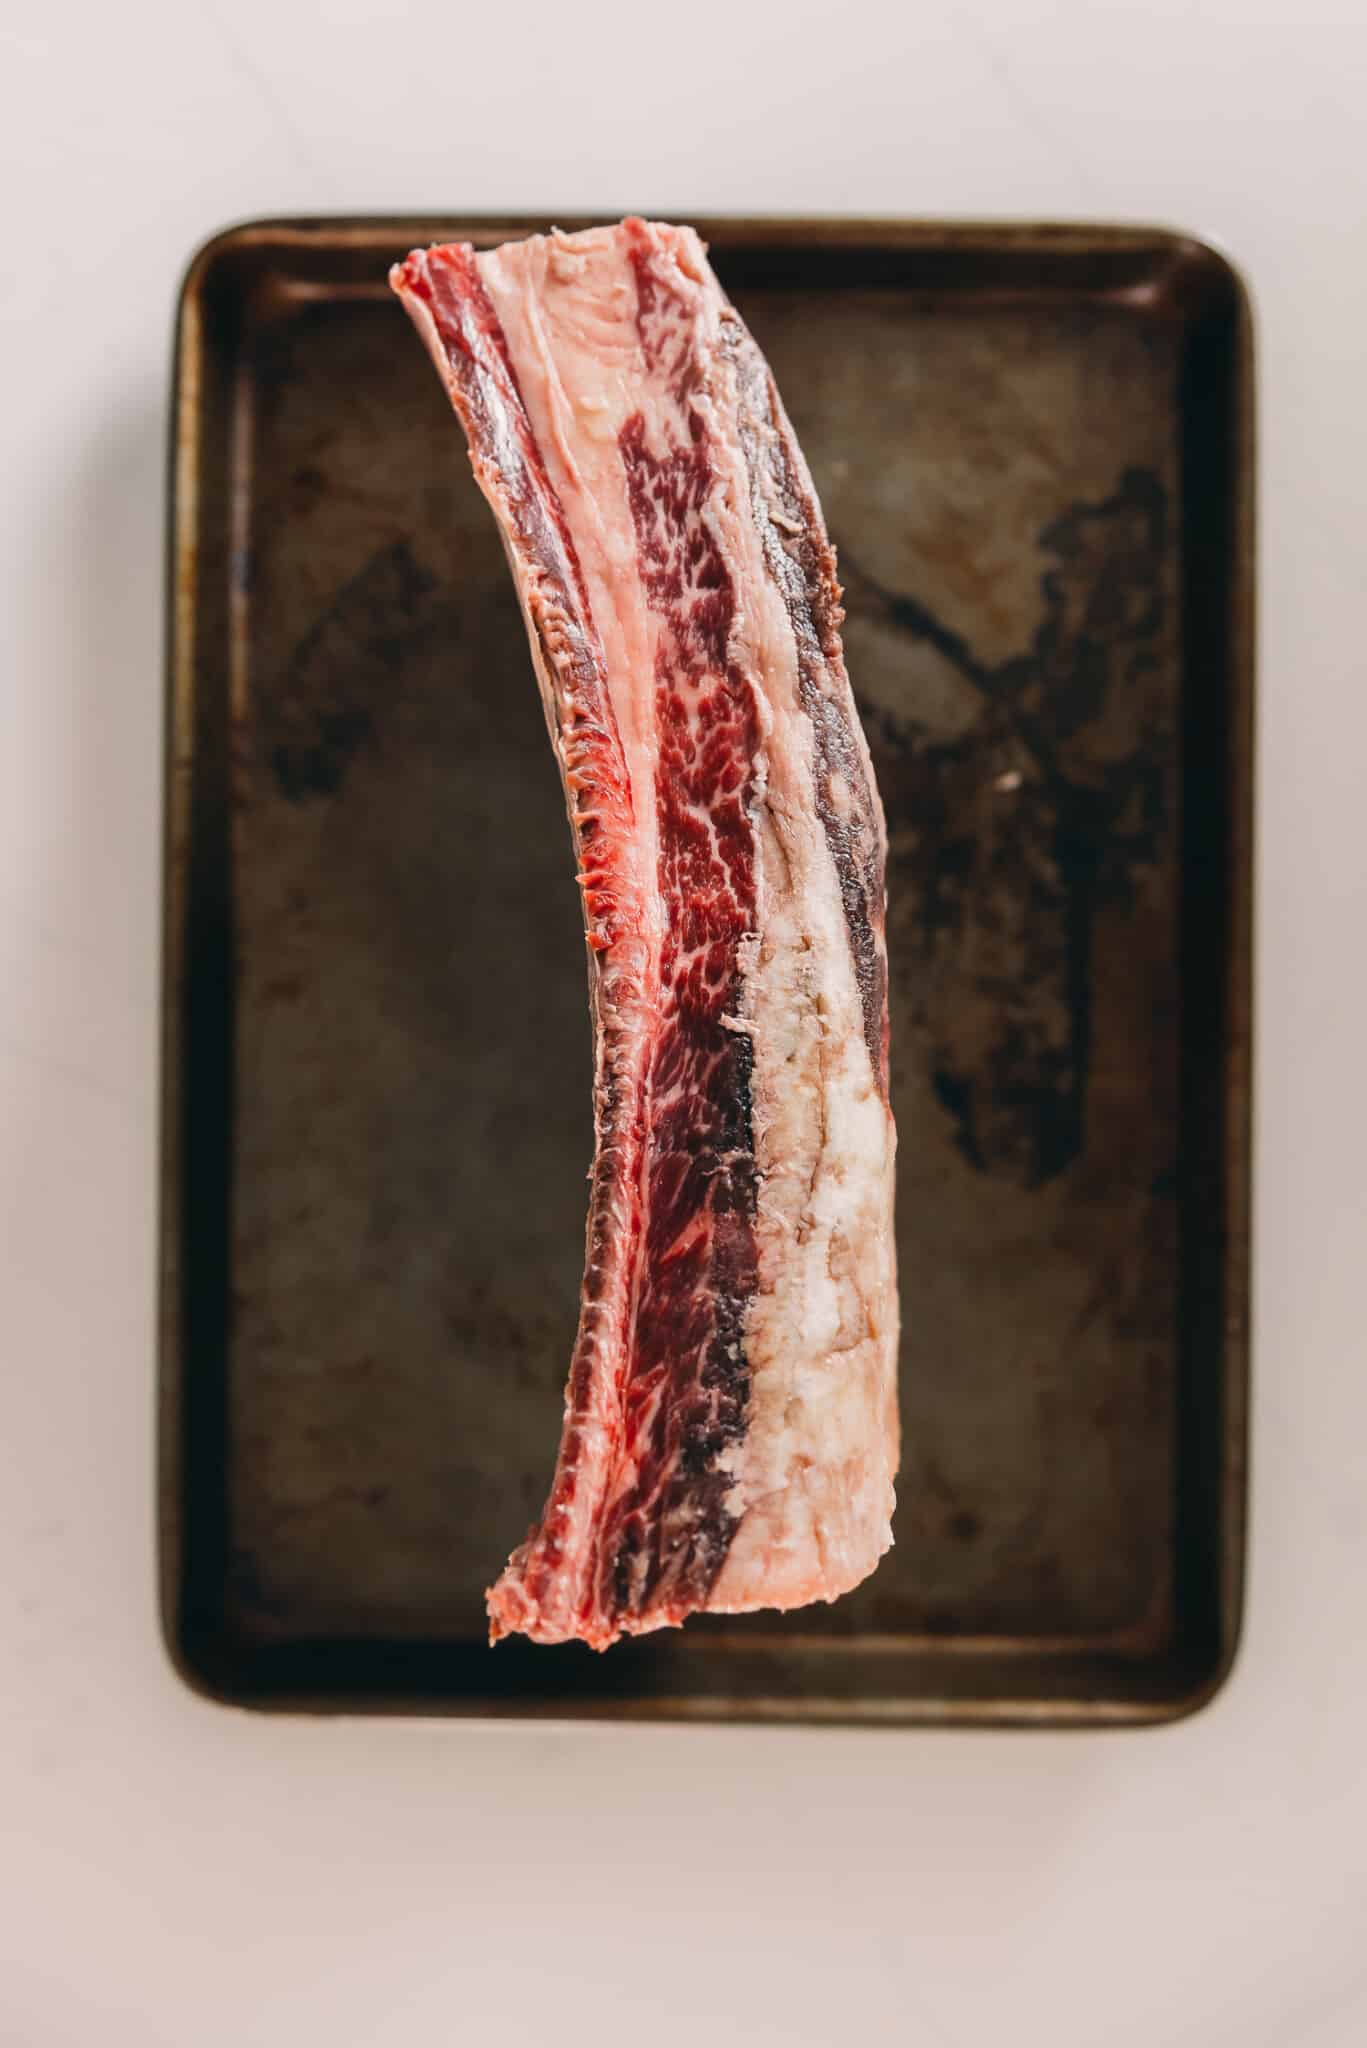 Showing the side of a beef rib as an example of meat to bone proportions. 